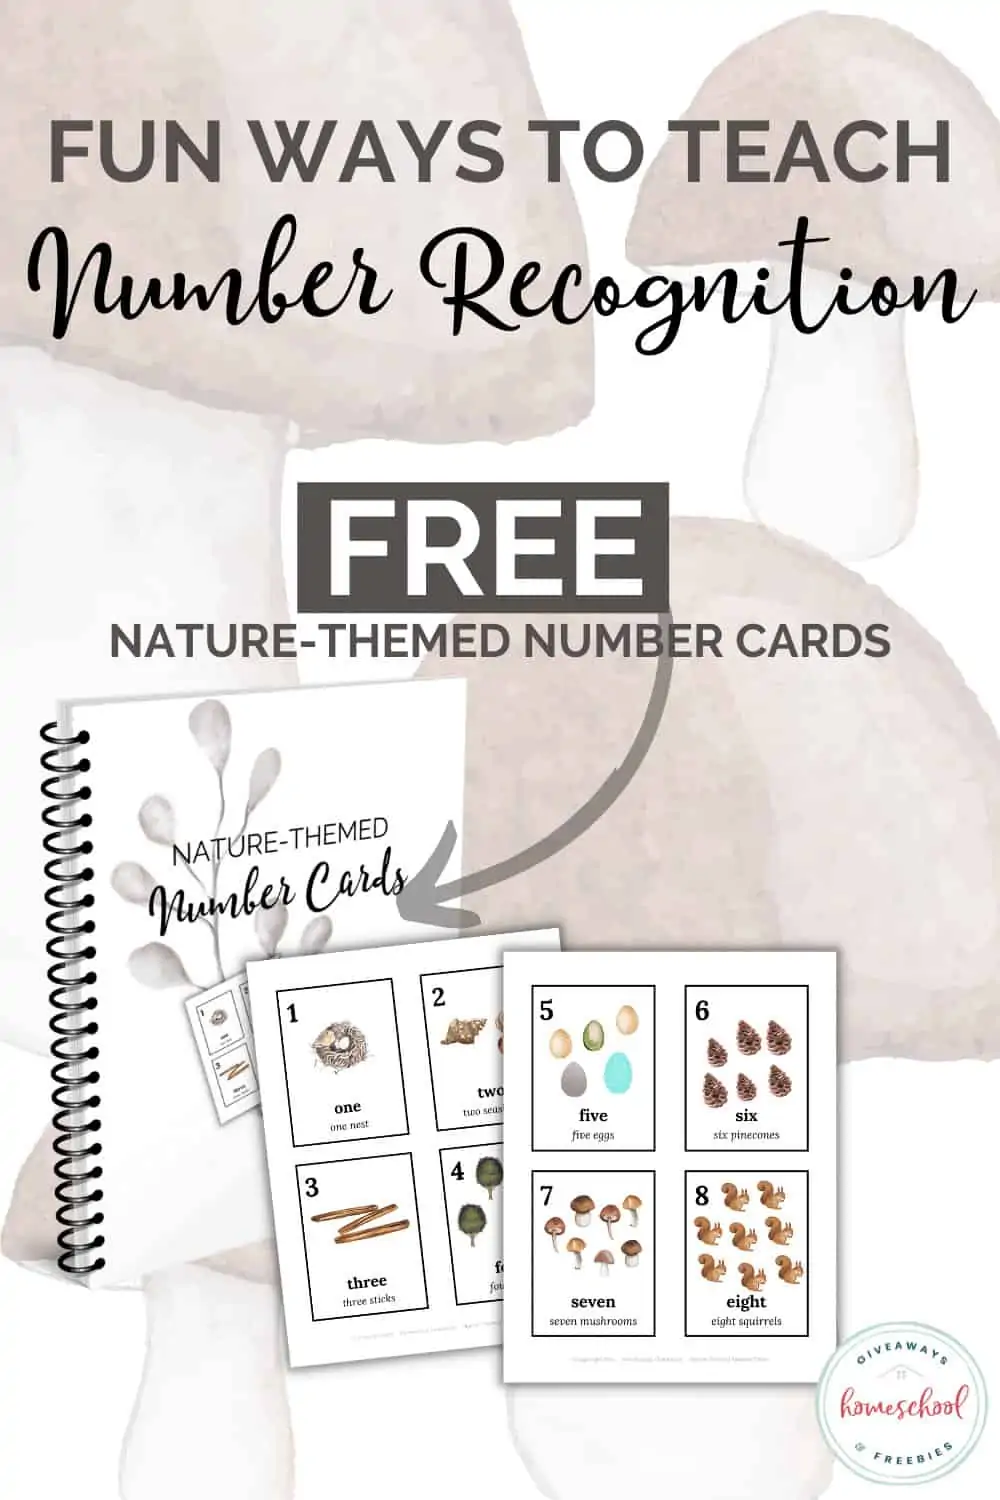 Fun Ways to Teach Number Recognition text with example of workbook and cards